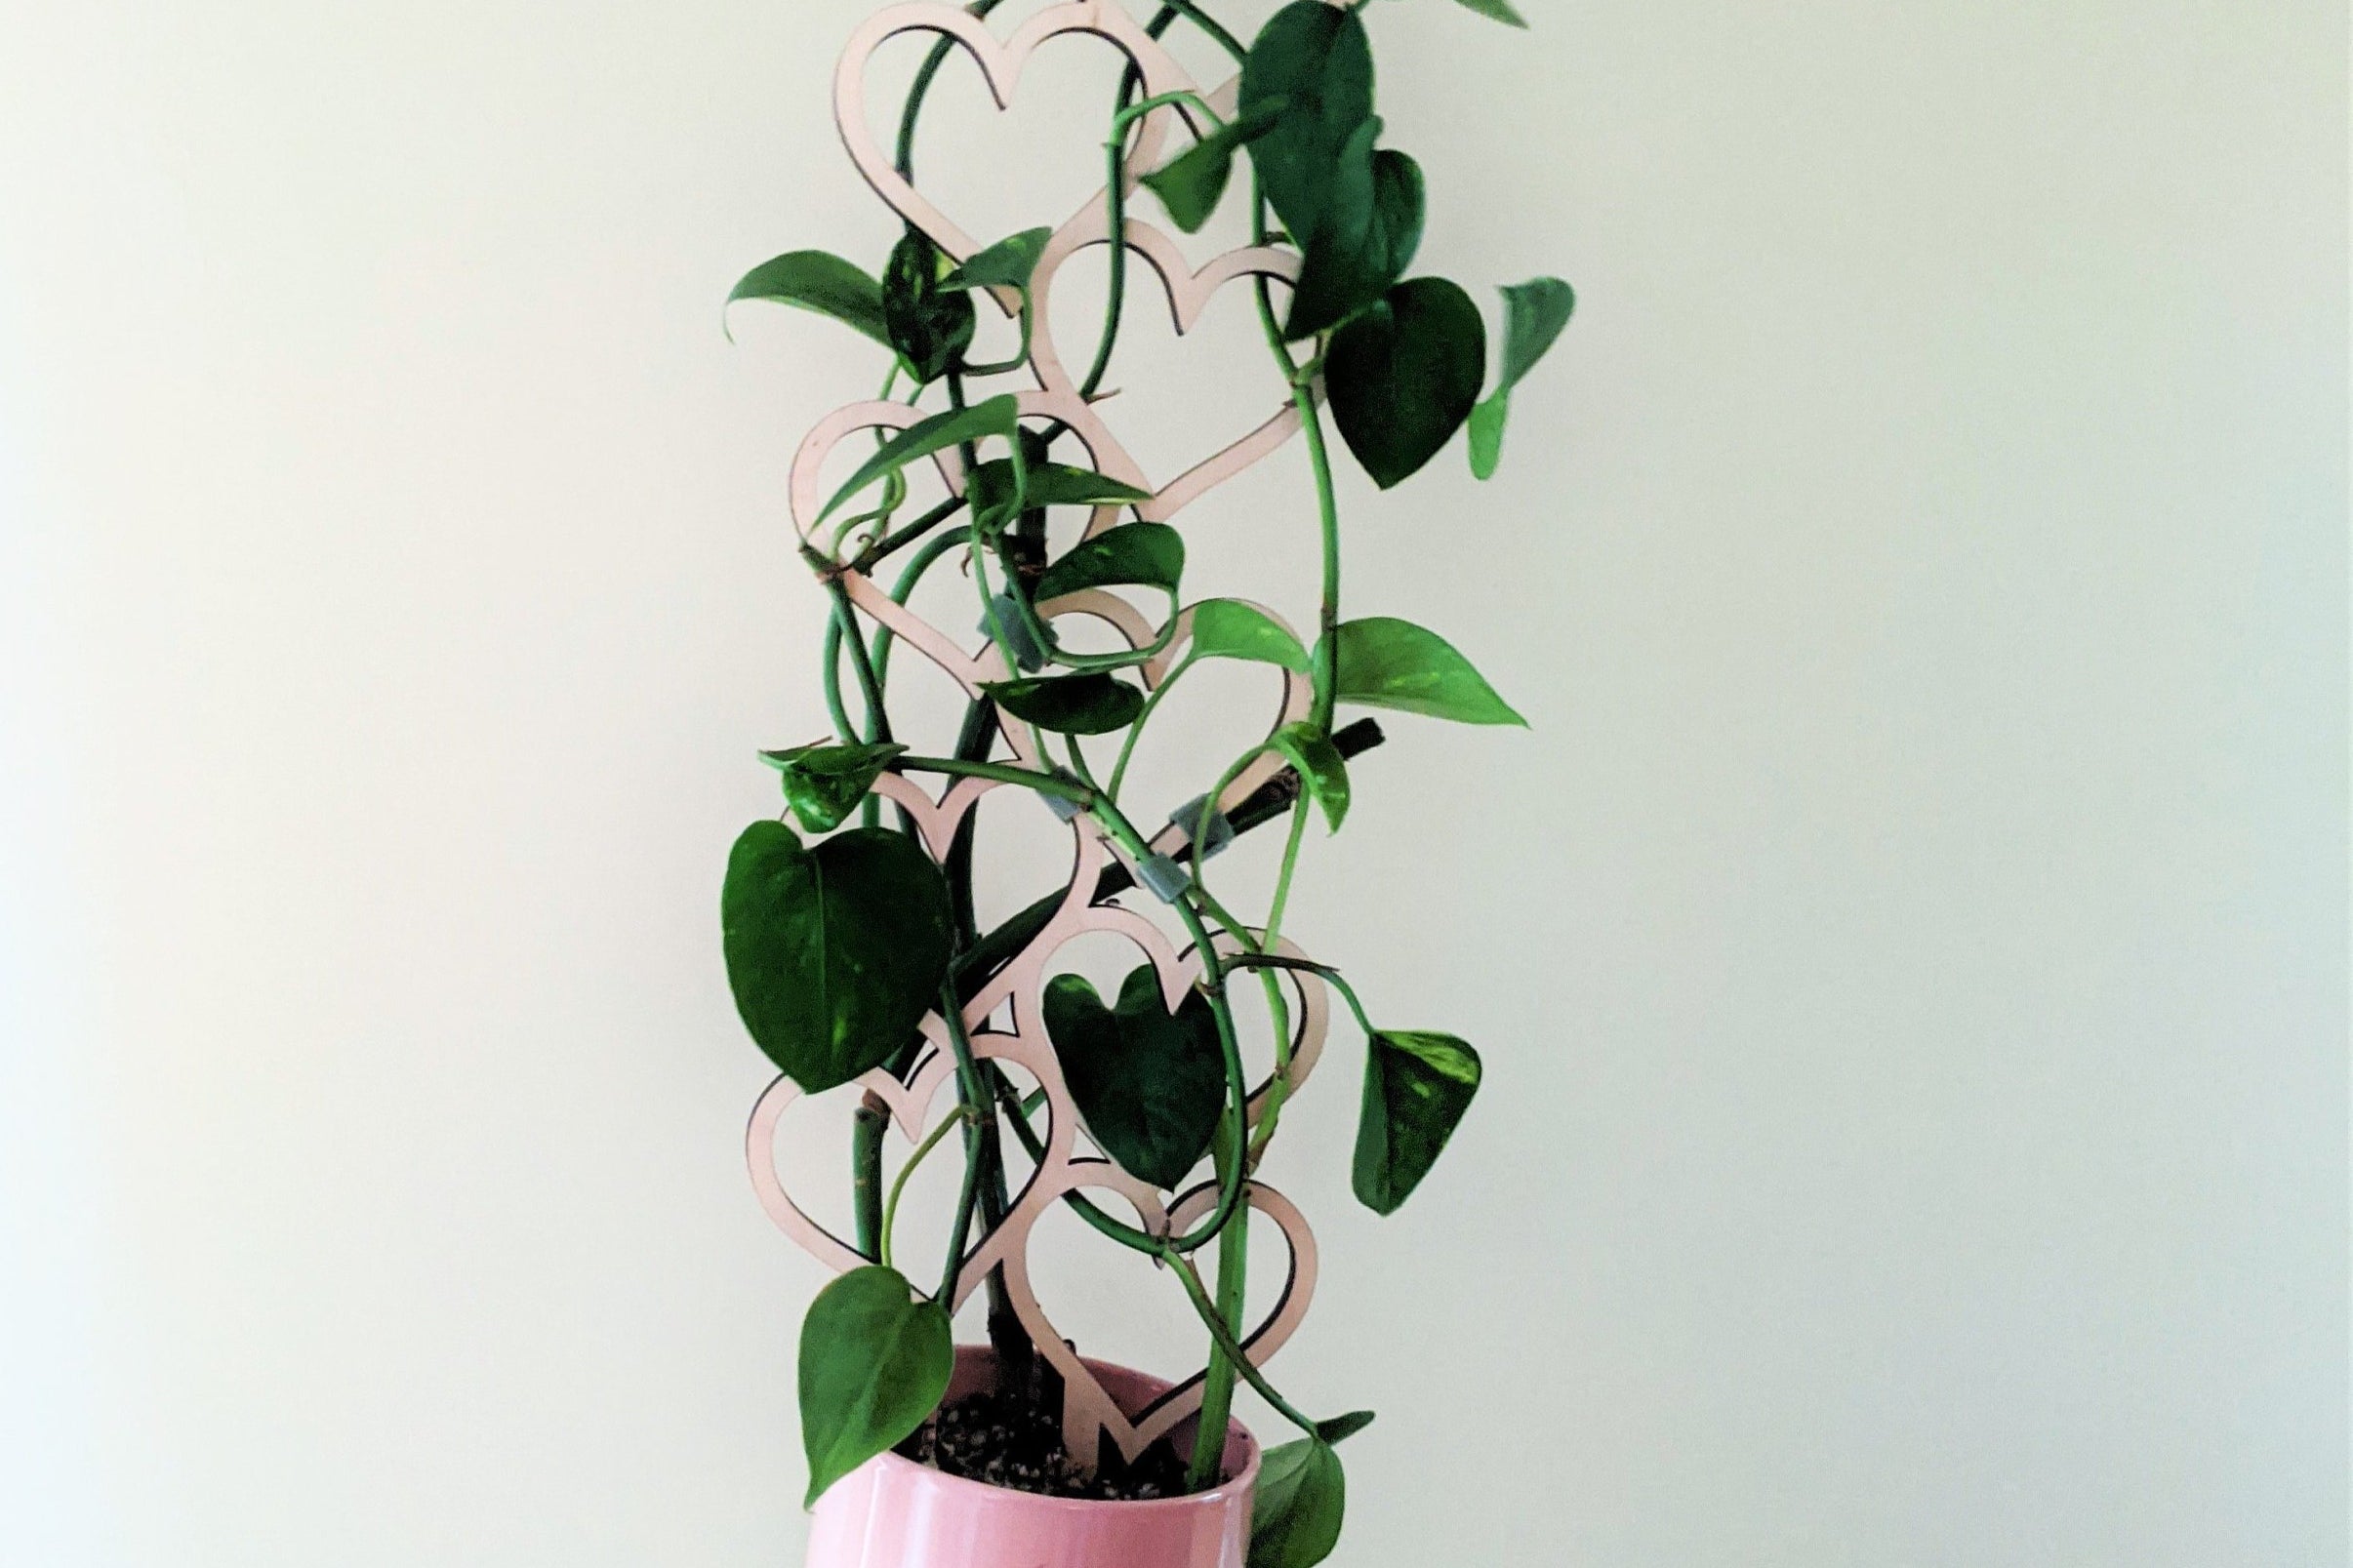 heart Indoor plant trellis for climbing plants in a pink pot